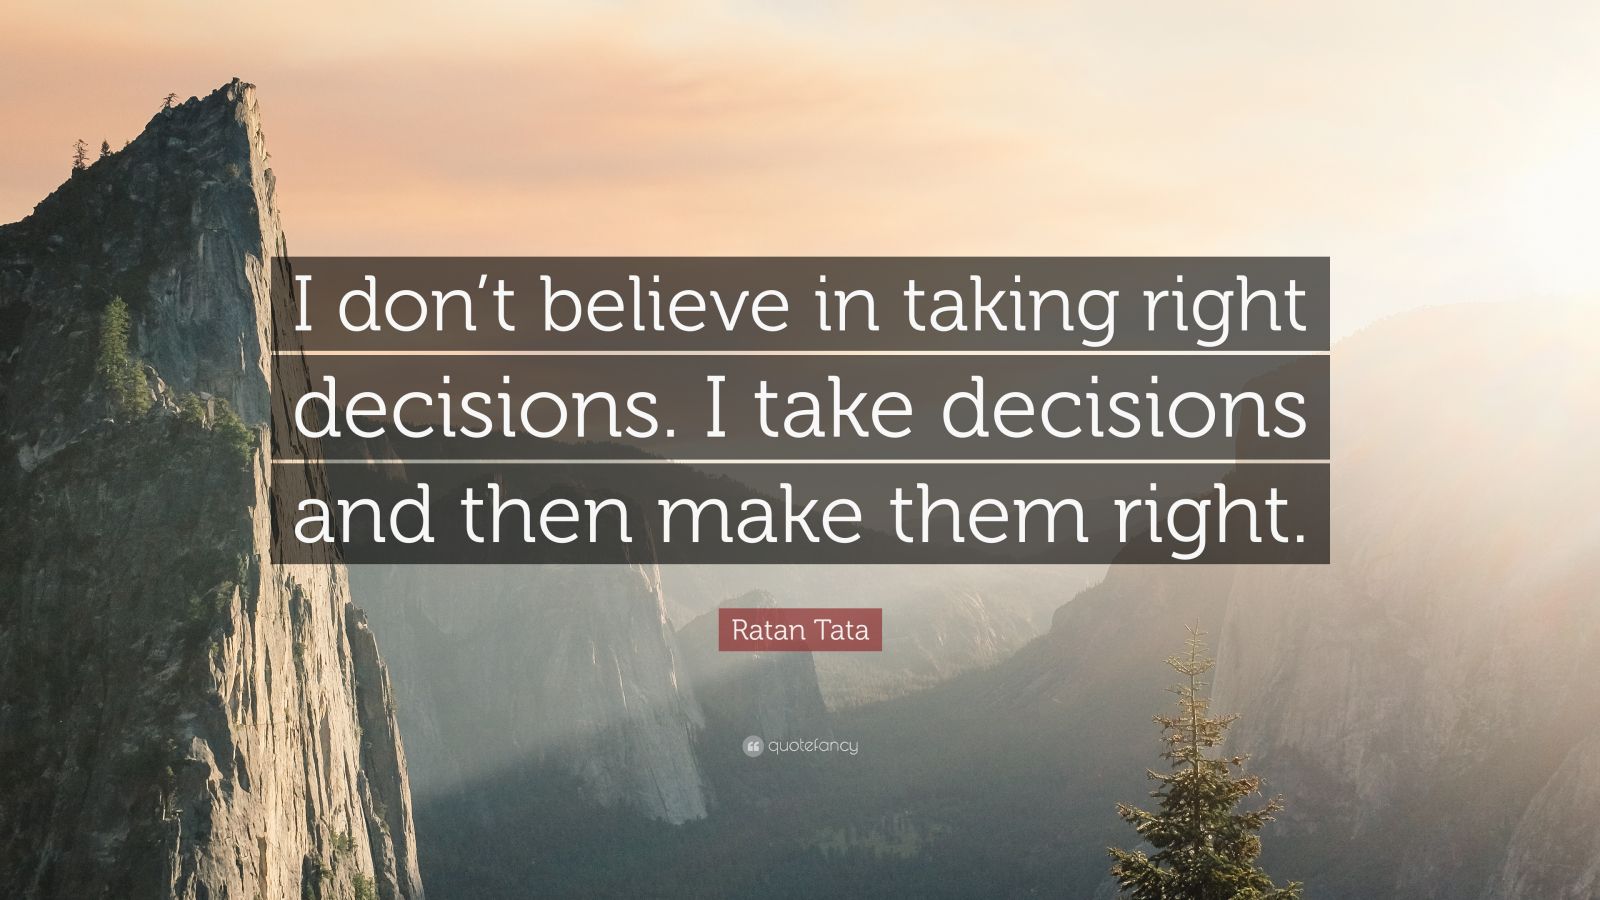 Ratan Tata Quote: “I don’t believe in taking right decisions. I take